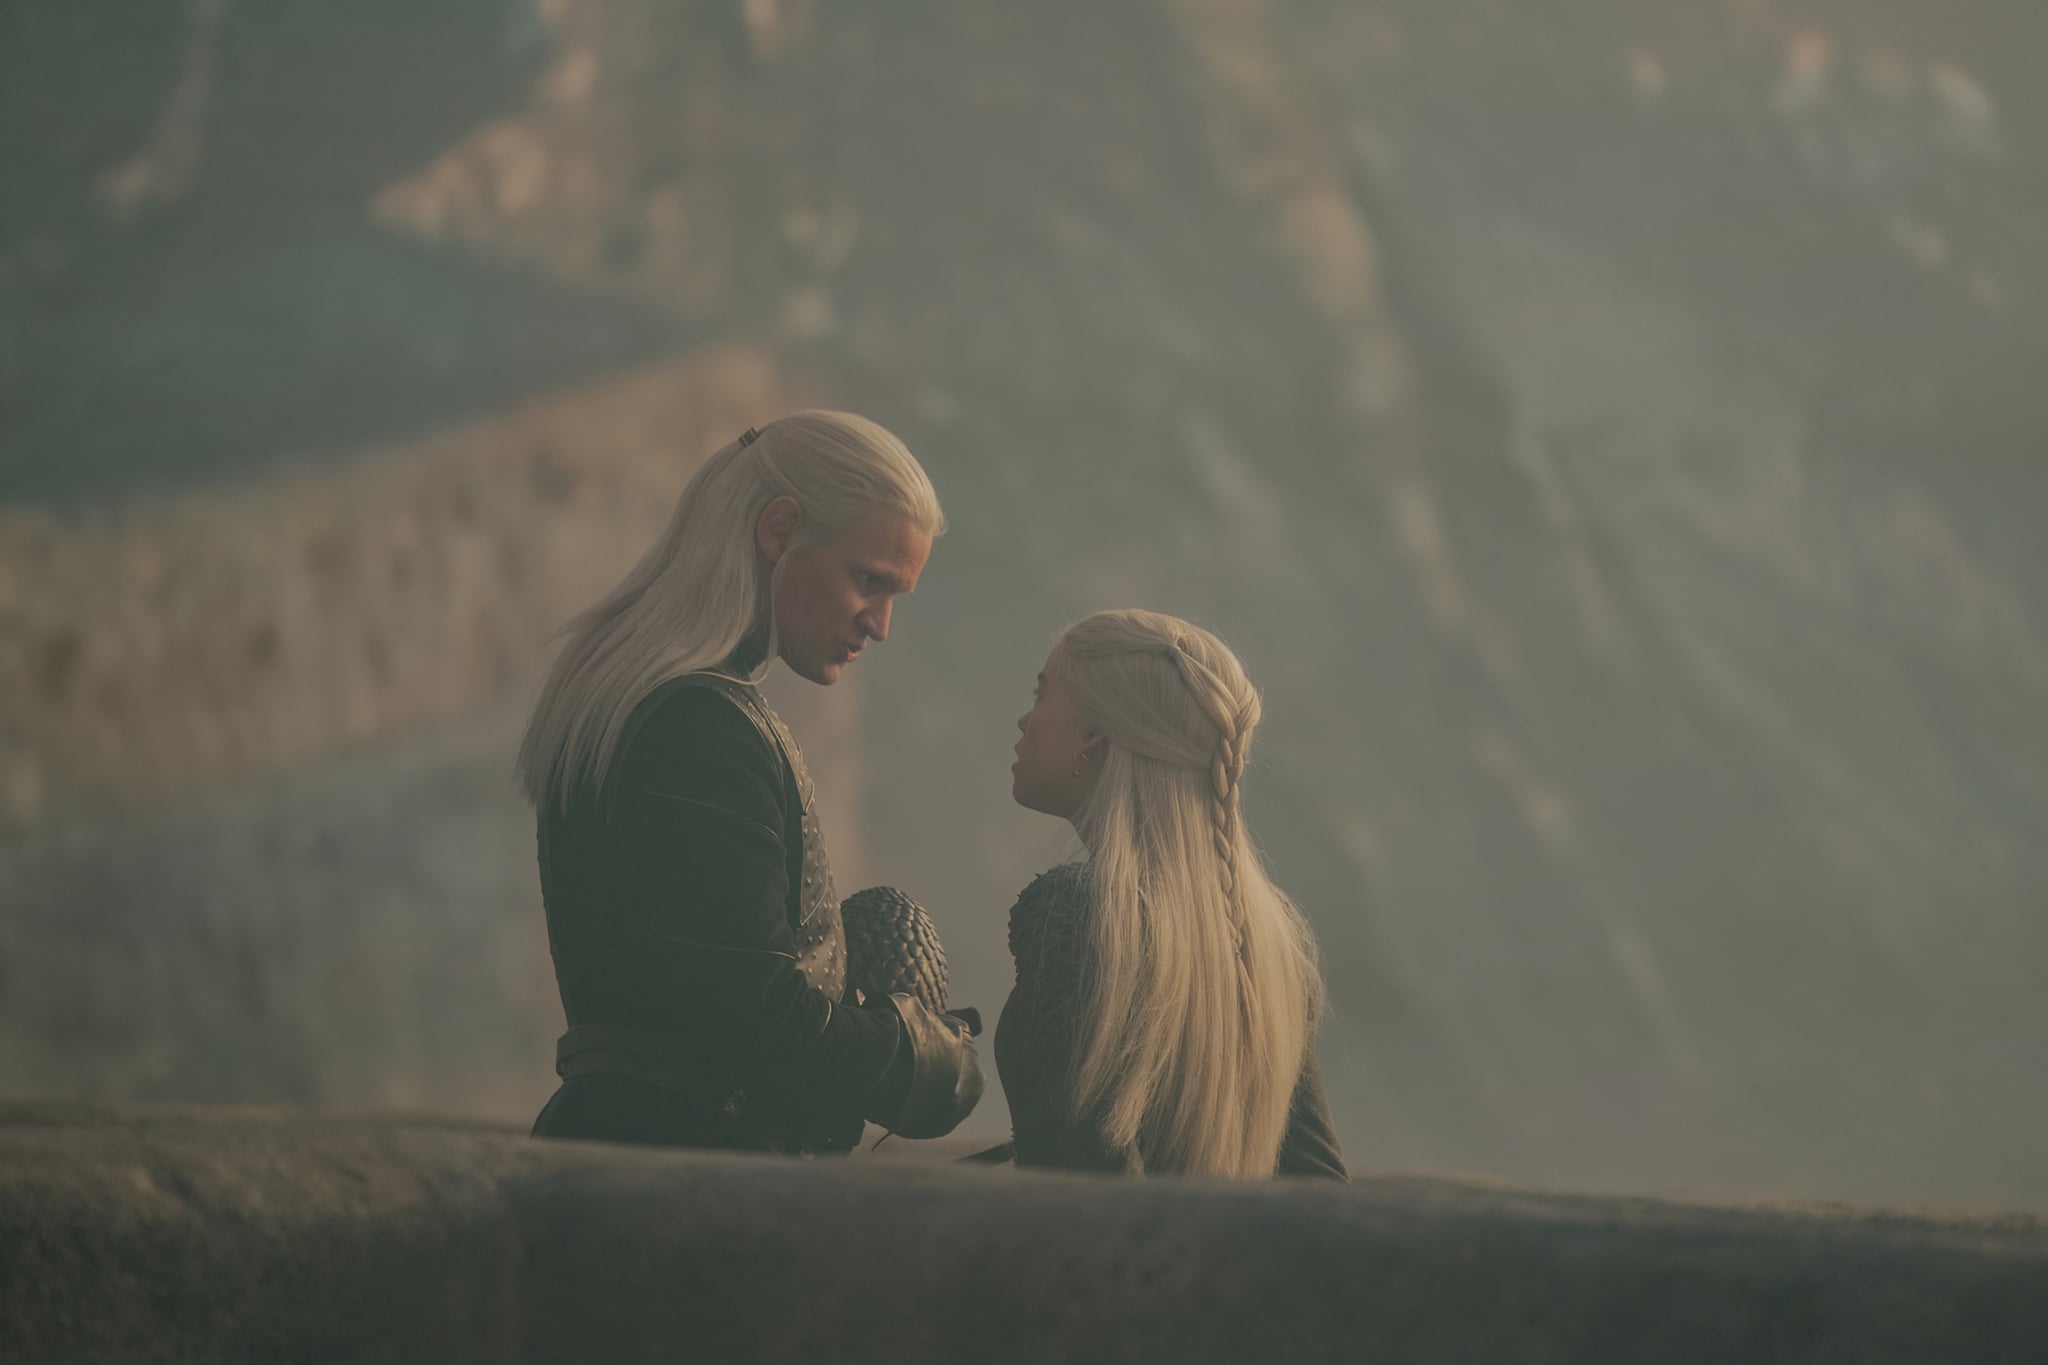 Rhaenyra and Daemon's Relationship Shapes the Future of Westeros, According to the Books